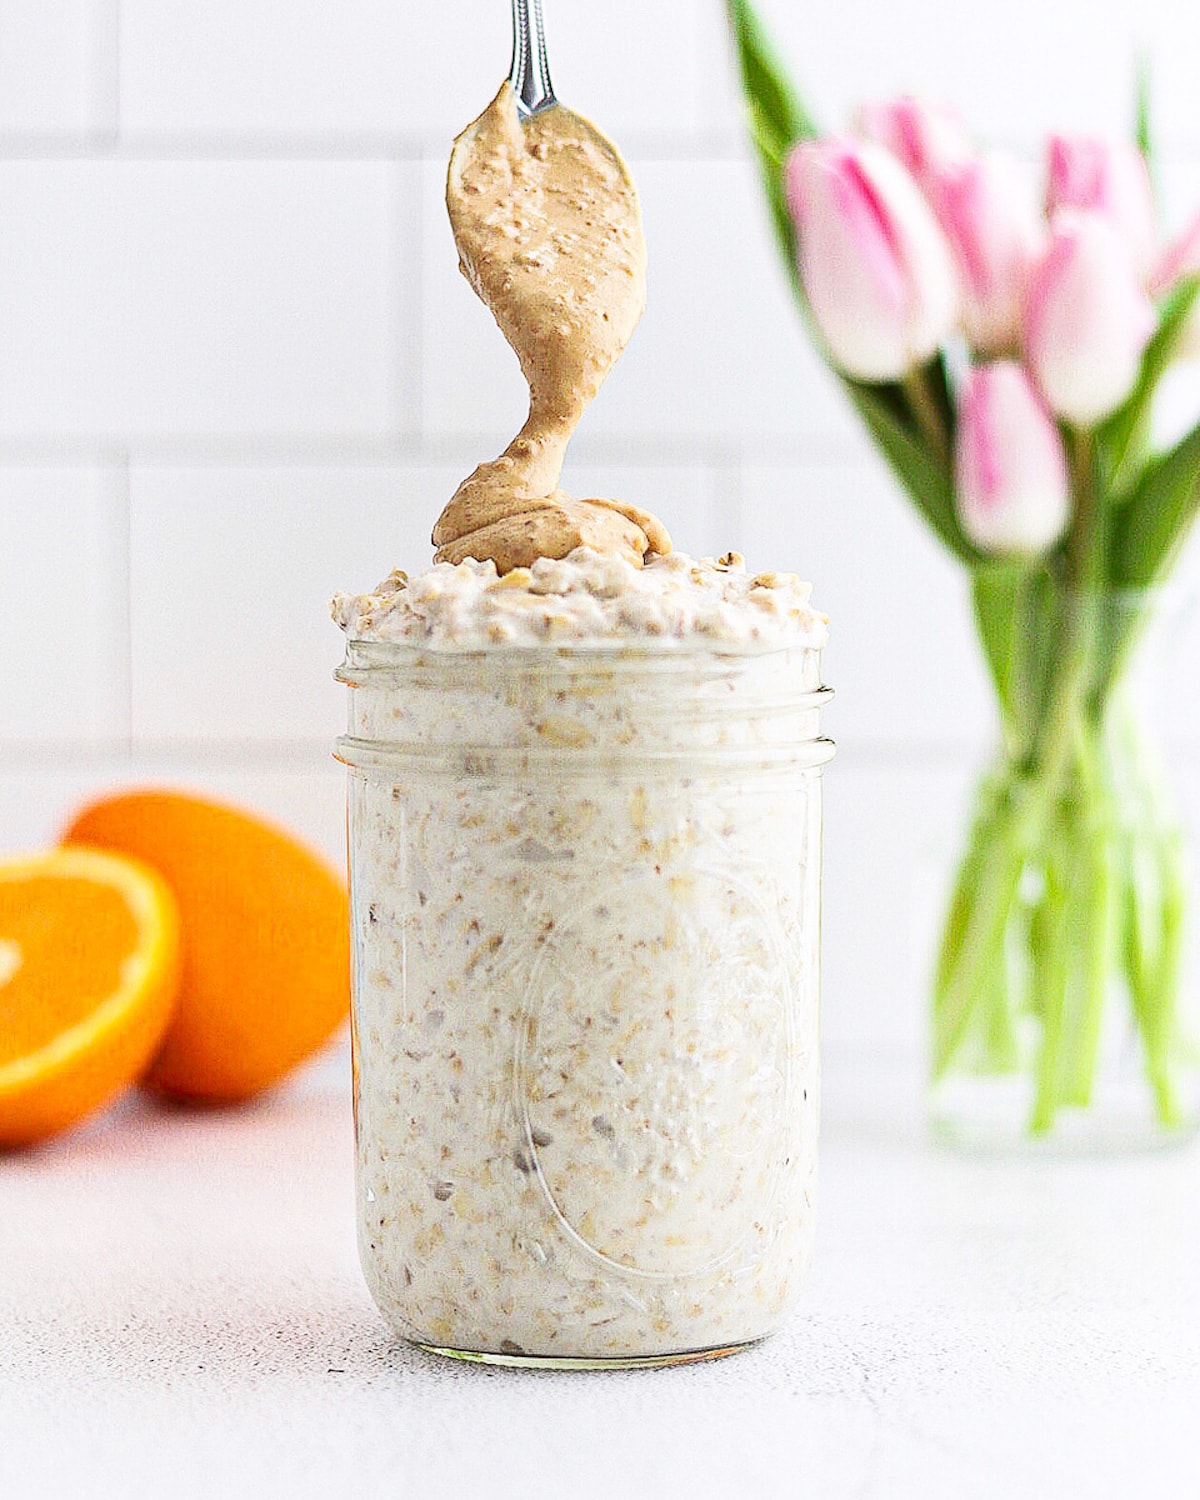 A mason jar with overnight oats inside. There is a silver spoon drizzling peanut butter on top of the oats. There is an orange and a vase of pink tulips in the back.